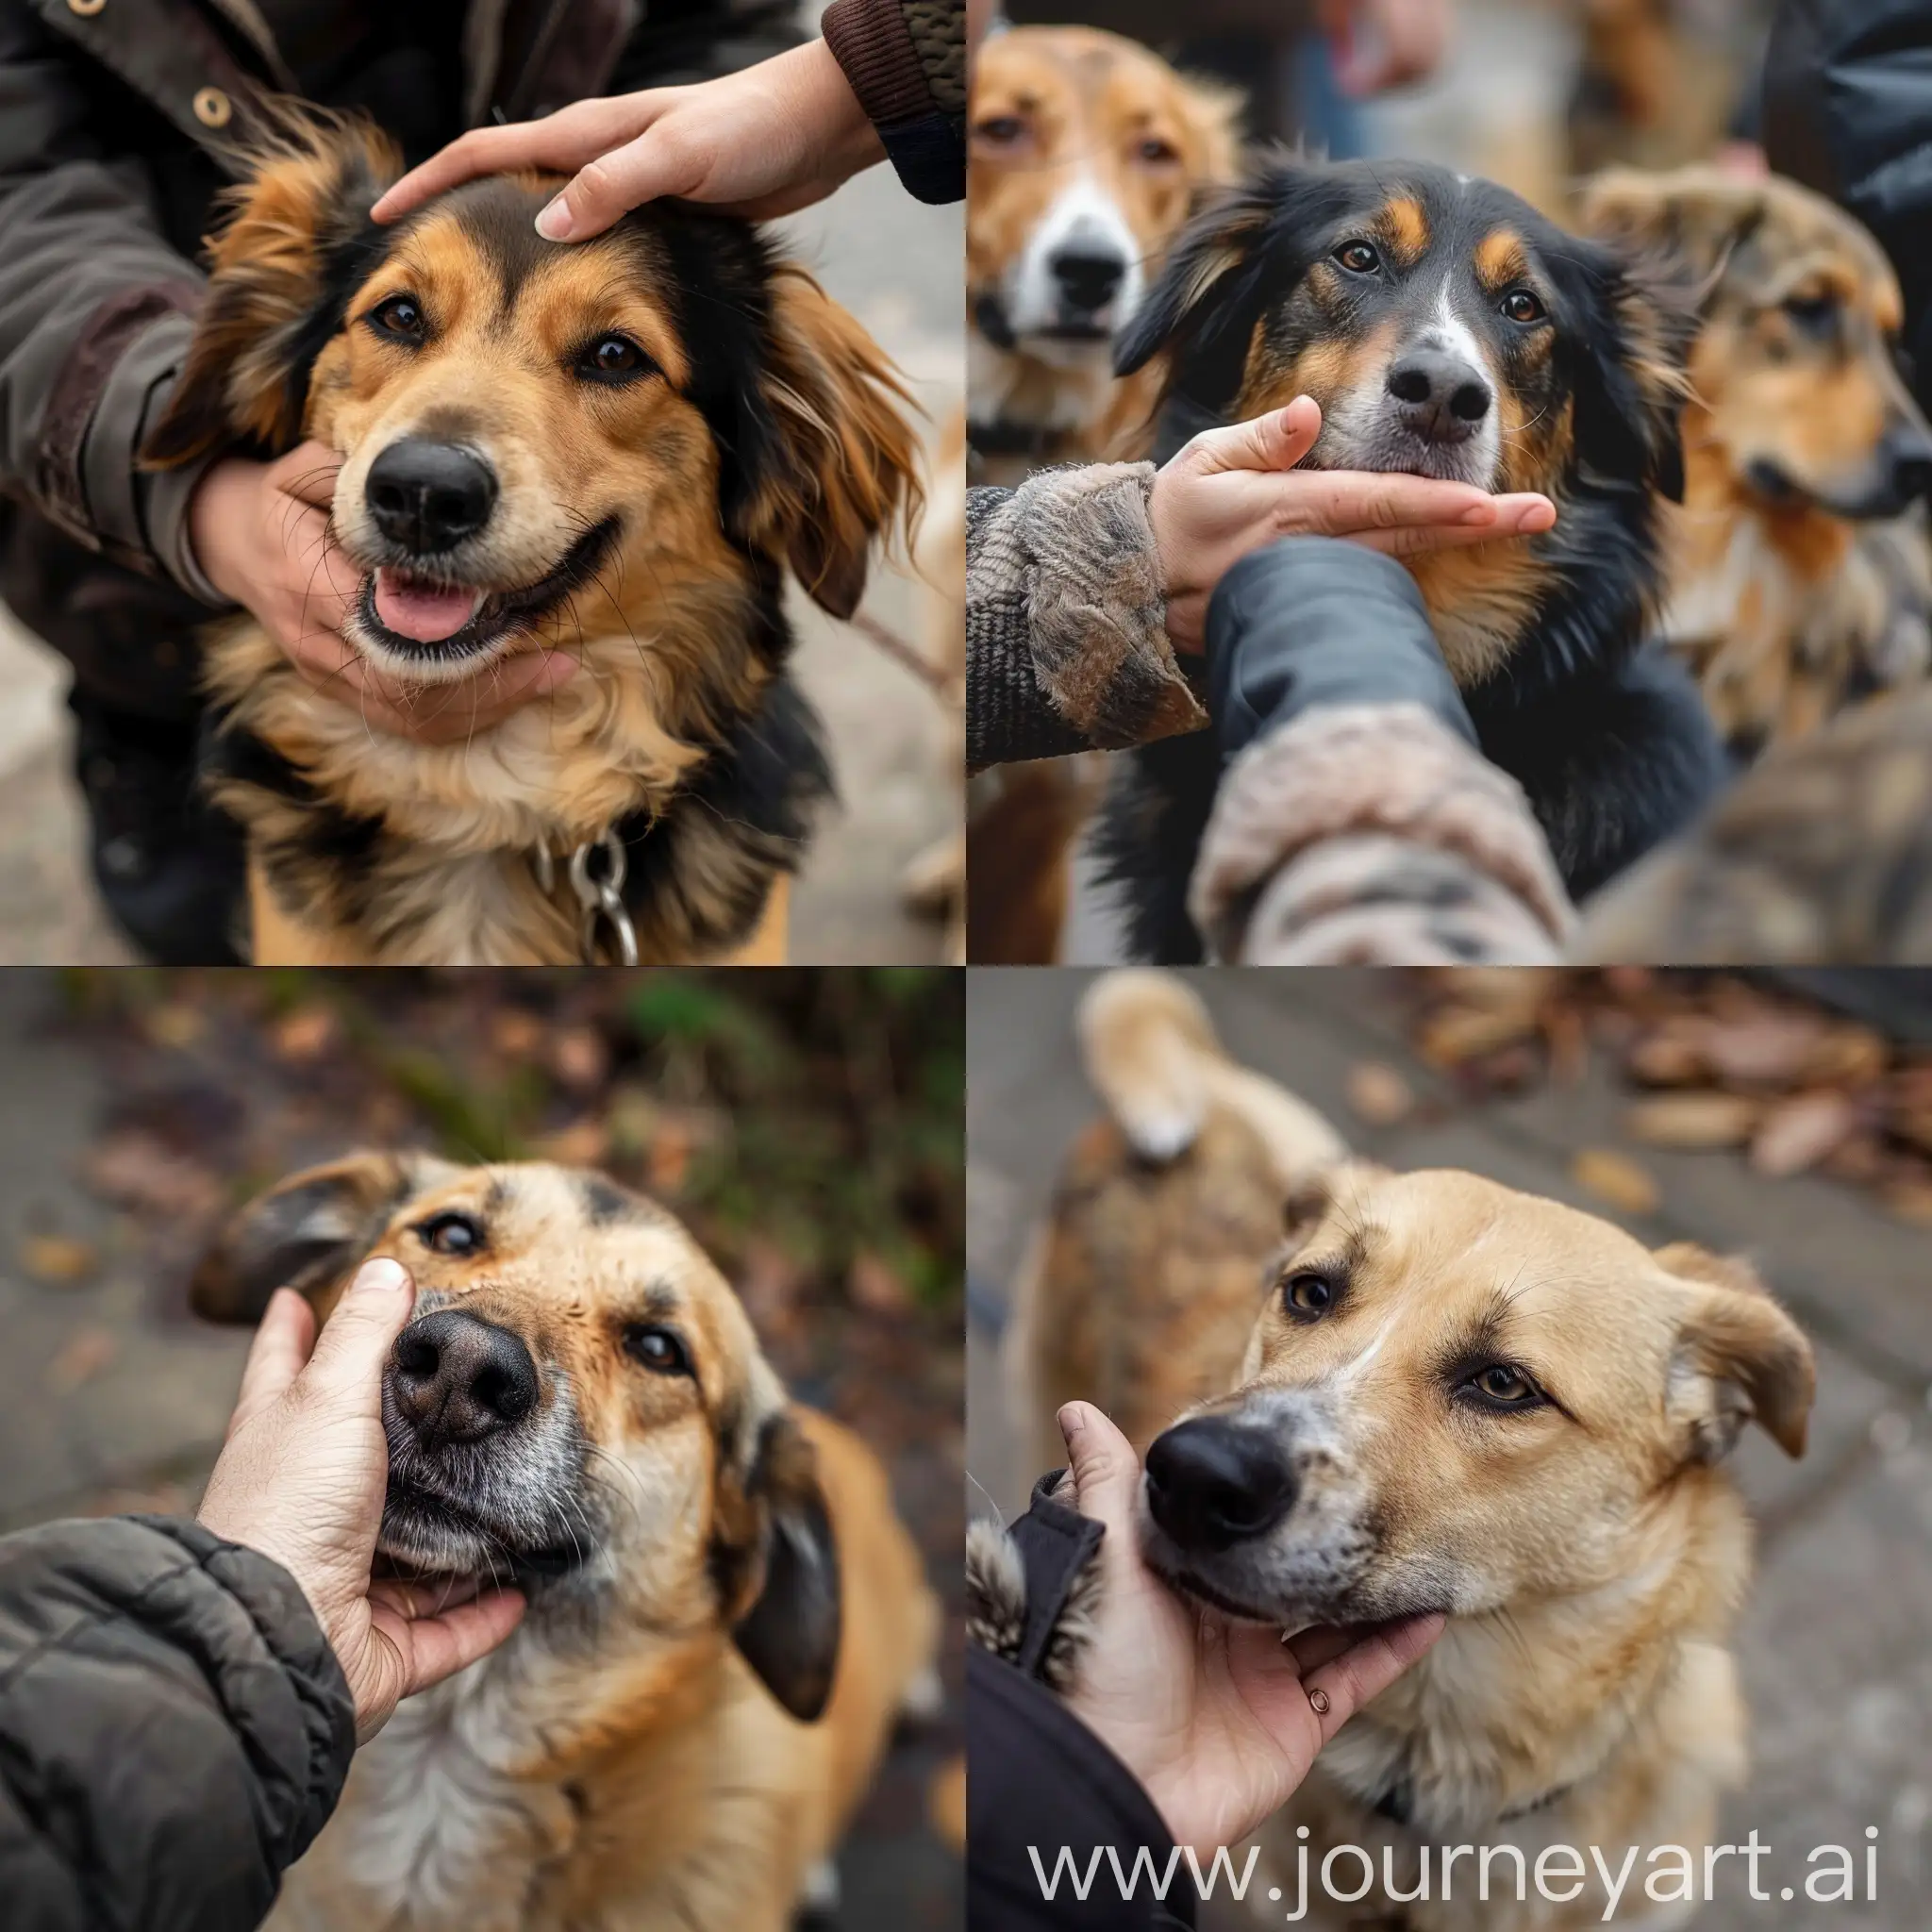 Joyful-Moments-Petting-Dogs-with-One-Hand